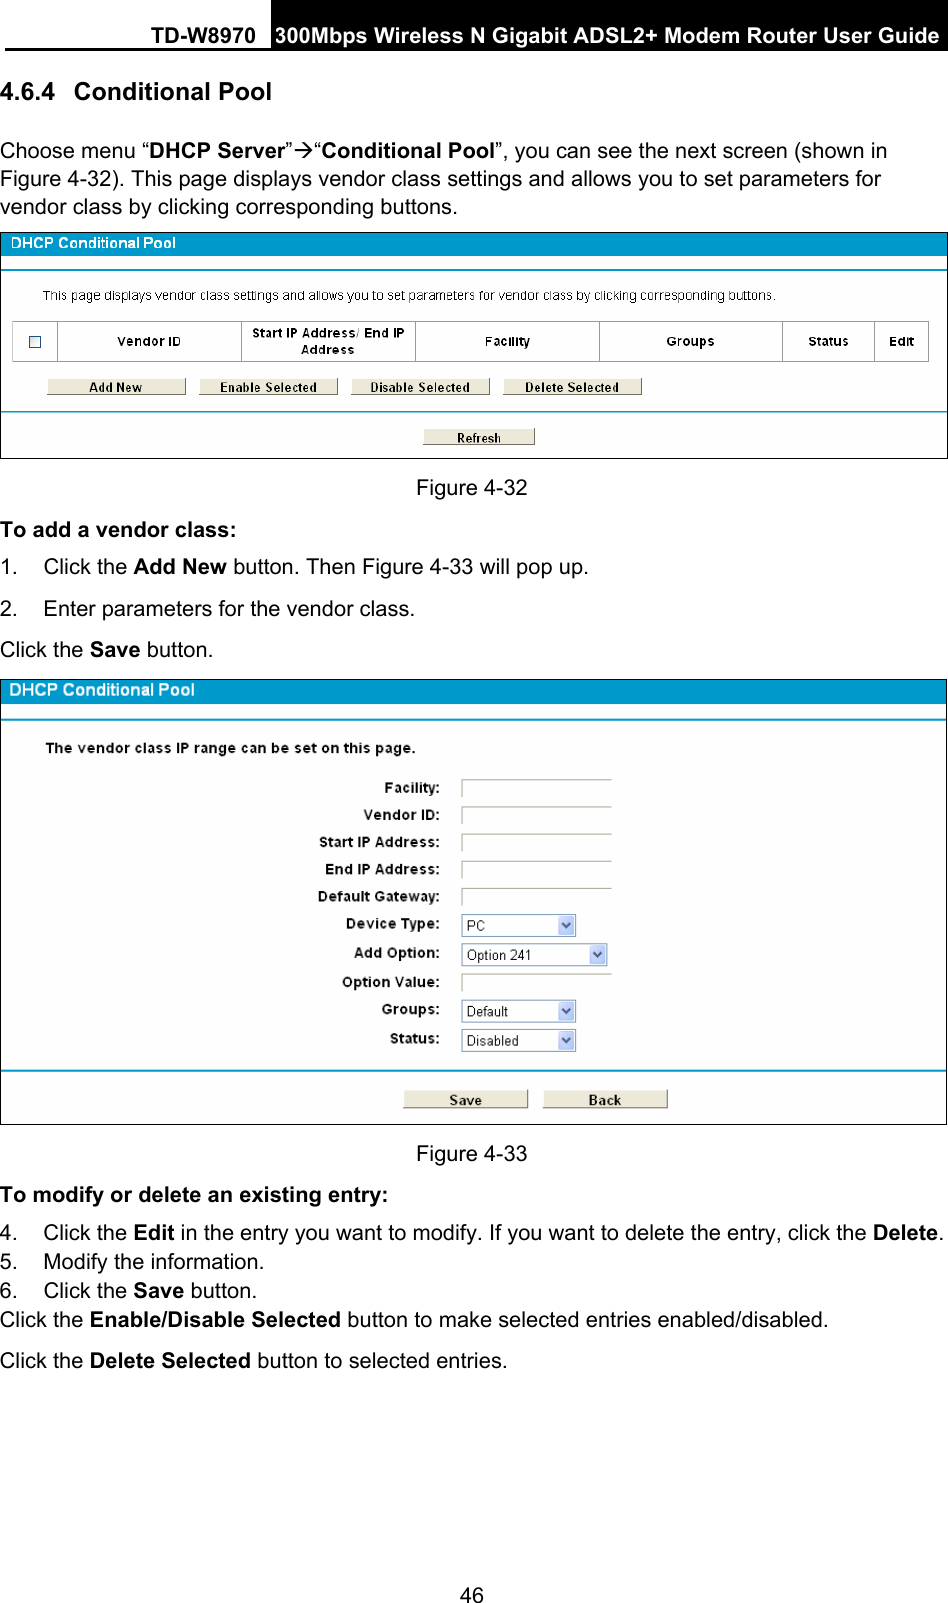 TD-W8970 300Mbps Wireless N Gigabit ADSL2+ Modem Router User Guide 46 4.6.4  Conditional Pool Choose menu “DHCP Server”Æ“Conditional Pool”, you can see the next screen (shown in Figure 4-32). This page displays vendor class settings and allows you to set parameters for vendor class by clicking corresponding buttons.  Figure 4-32 To add a vendor class: 1. Click the Add New button. Then Figure 4-33 will pop up. 2.  Enter parameters for the vendor class.   Click the Save button.  Figure 4-33 To modify or delete an existing entry: 4. Click the Edit in the entry you want to modify. If you want to delete the entry, click the Delete. 5.  Modify the information.   6. Click the Save button. Click the Enable/Disable Selected button to make selected entries enabled/disabled. Click the Delete Selected button to selected entries. 